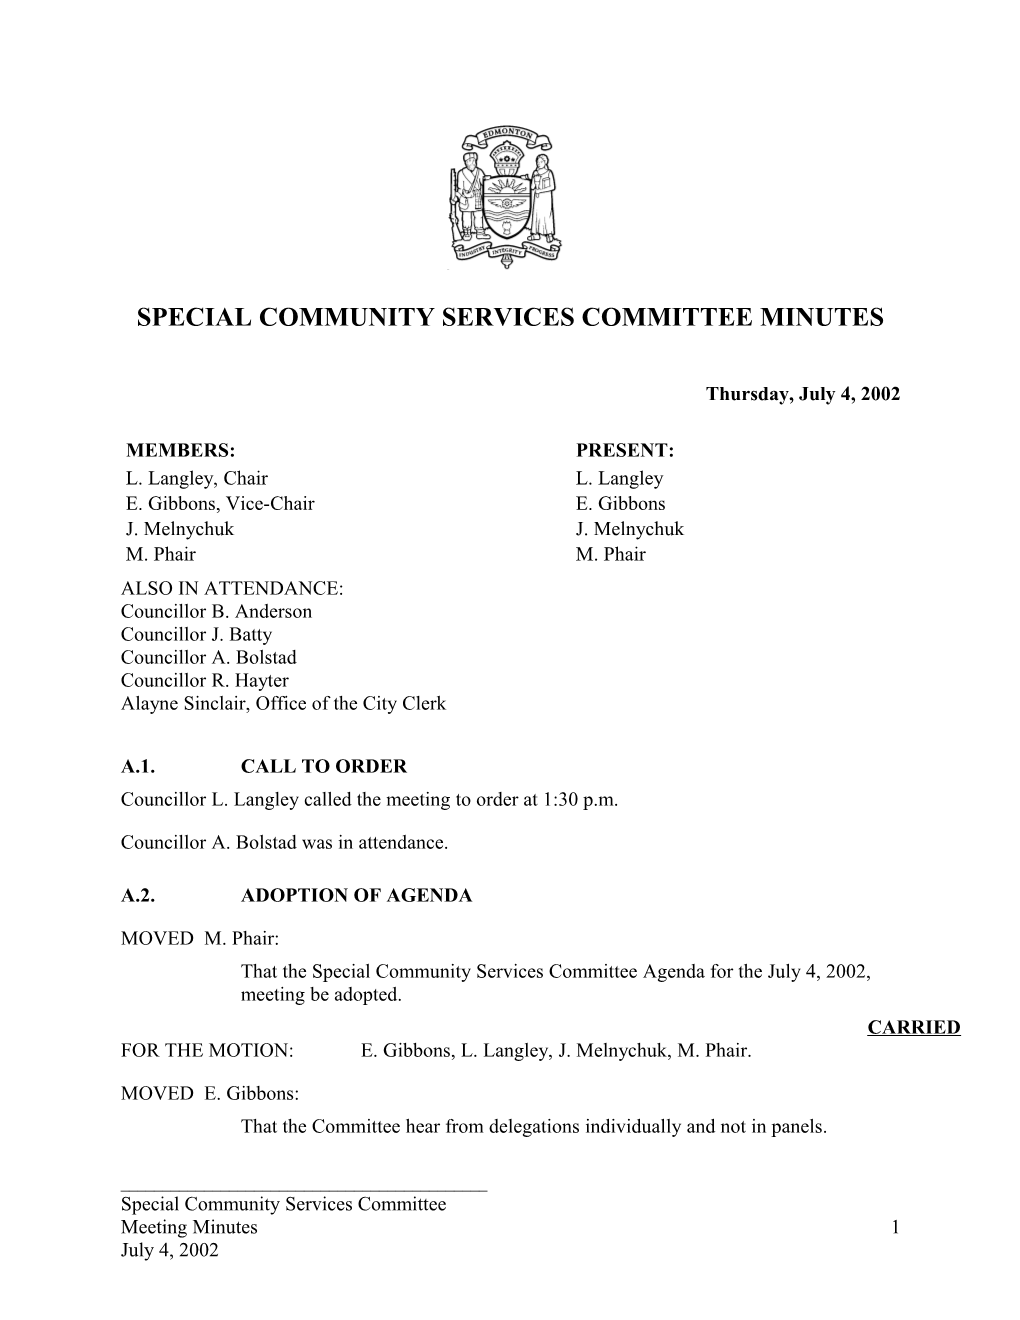 Minutes for Community Services Committee July 4, 2002 Meeting